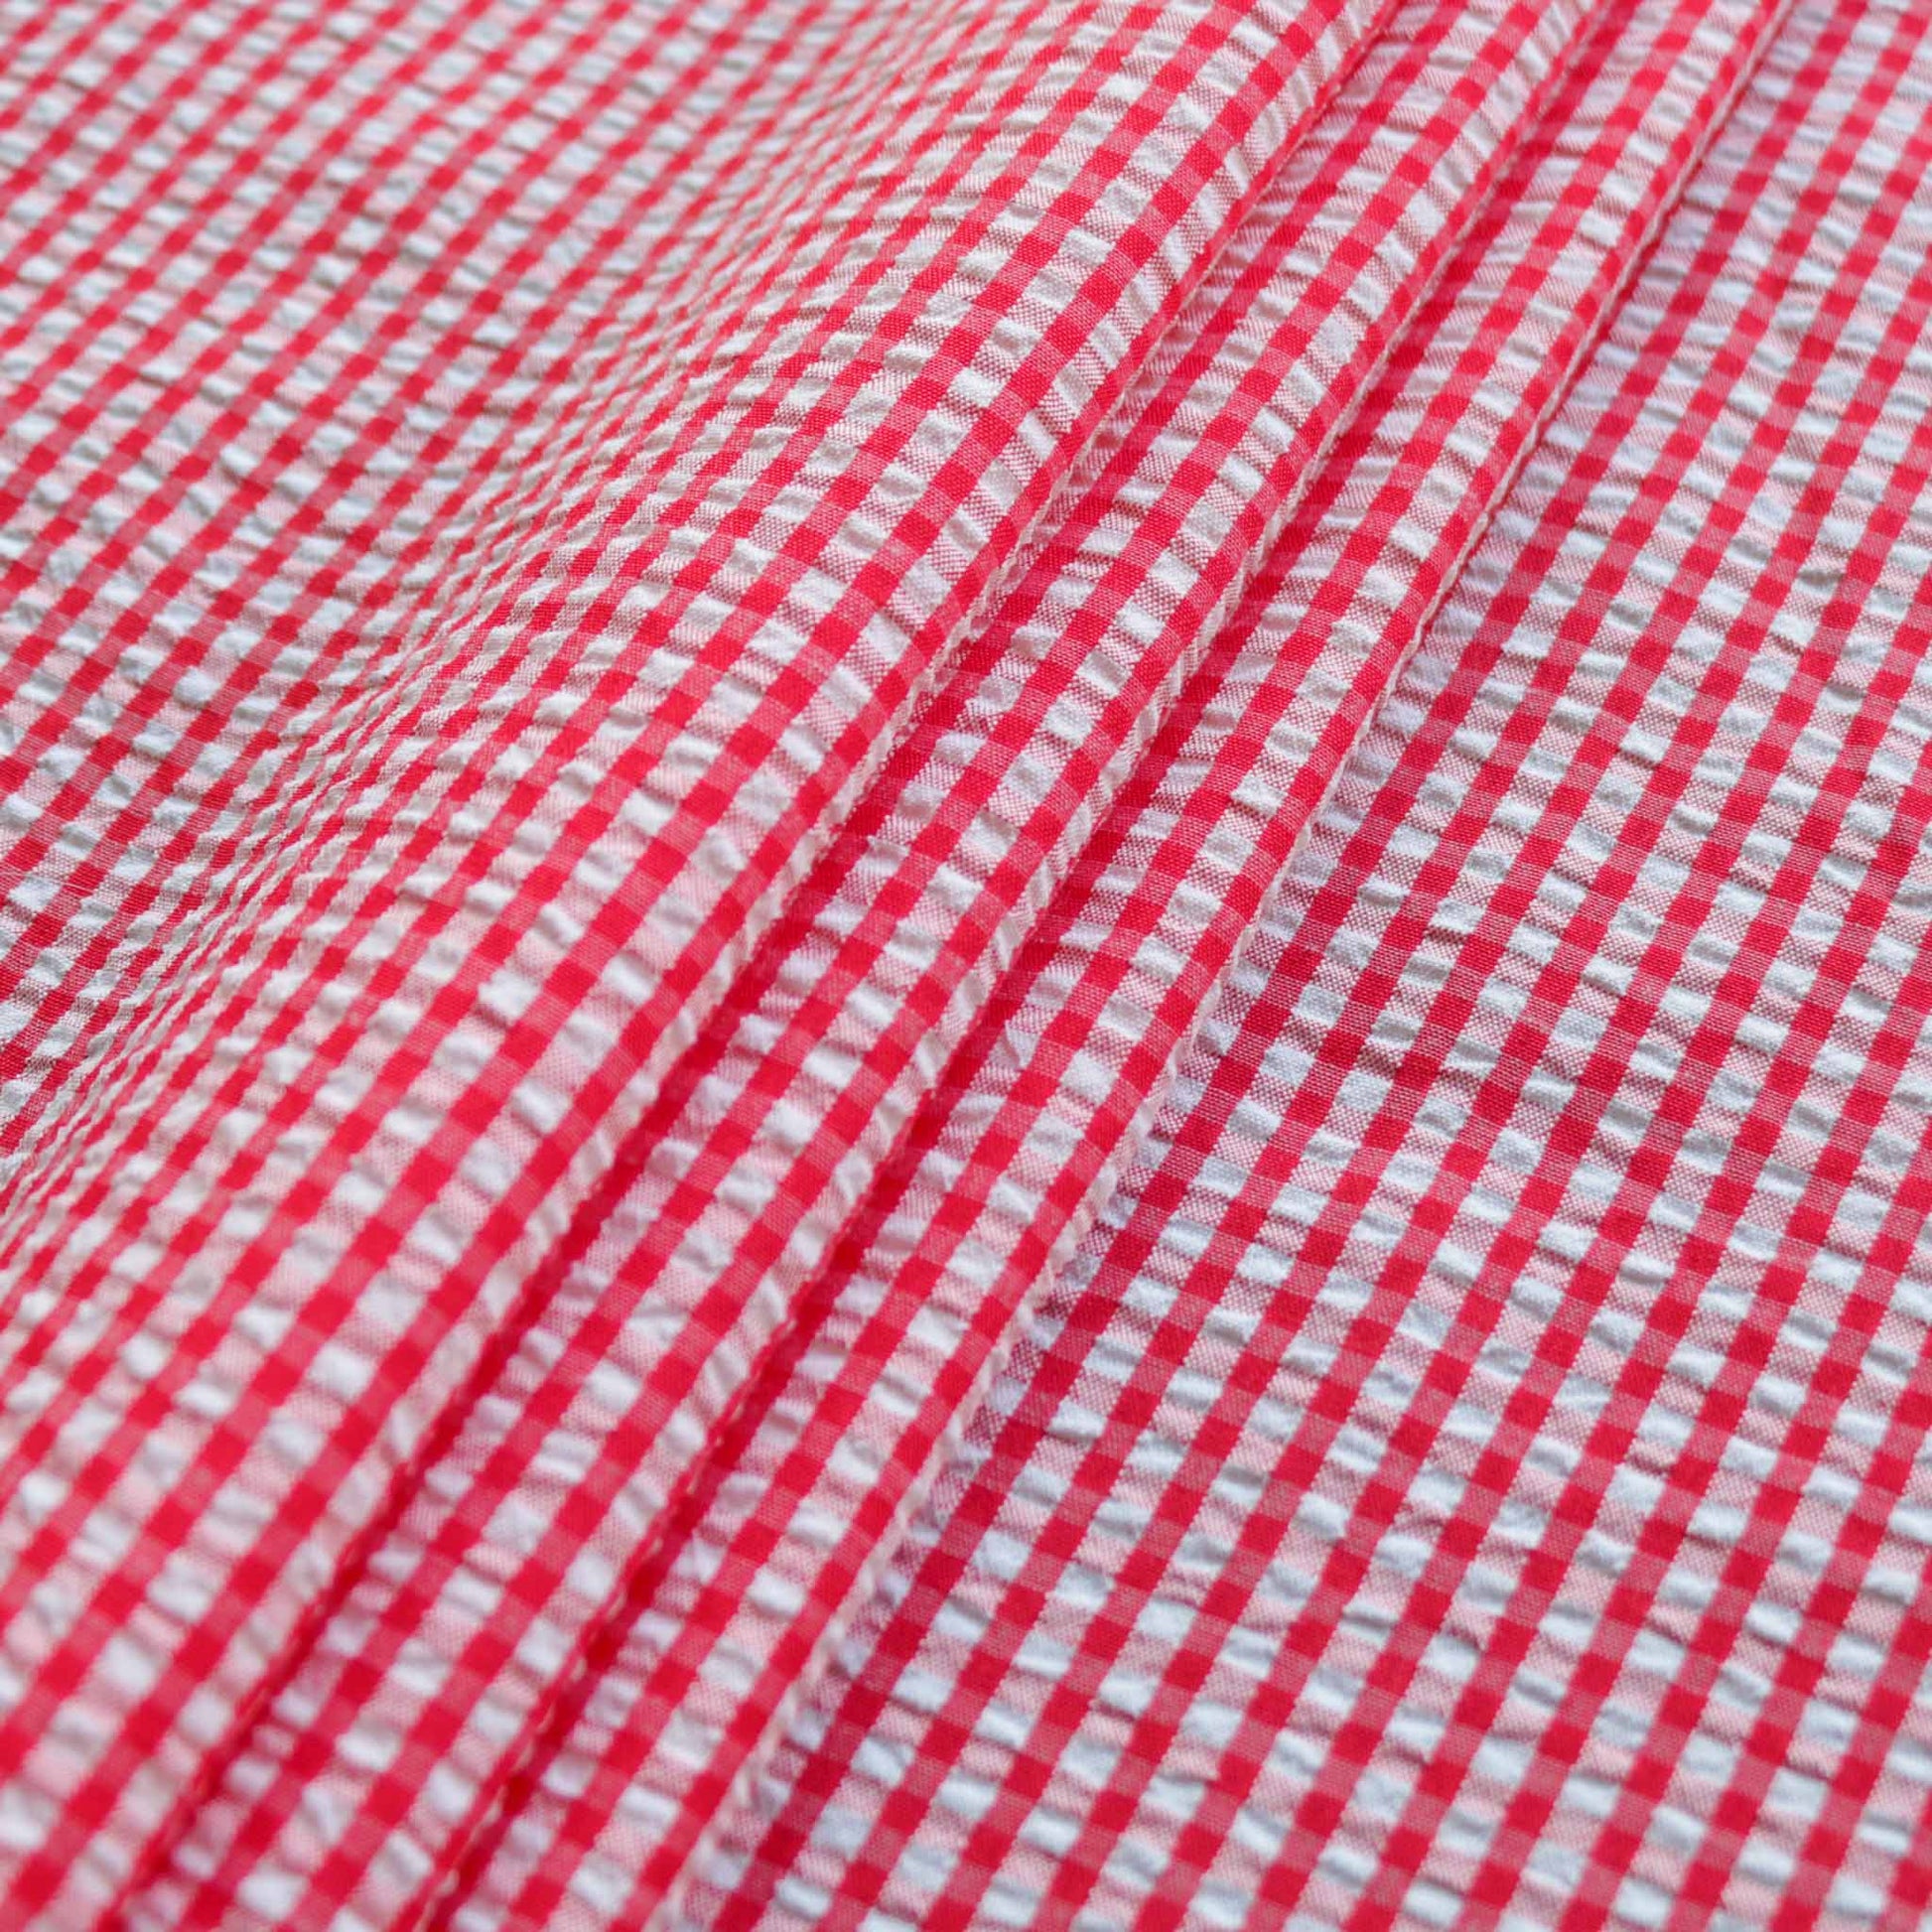 folded red and white seersucker dressmaking fabric with gingham style design